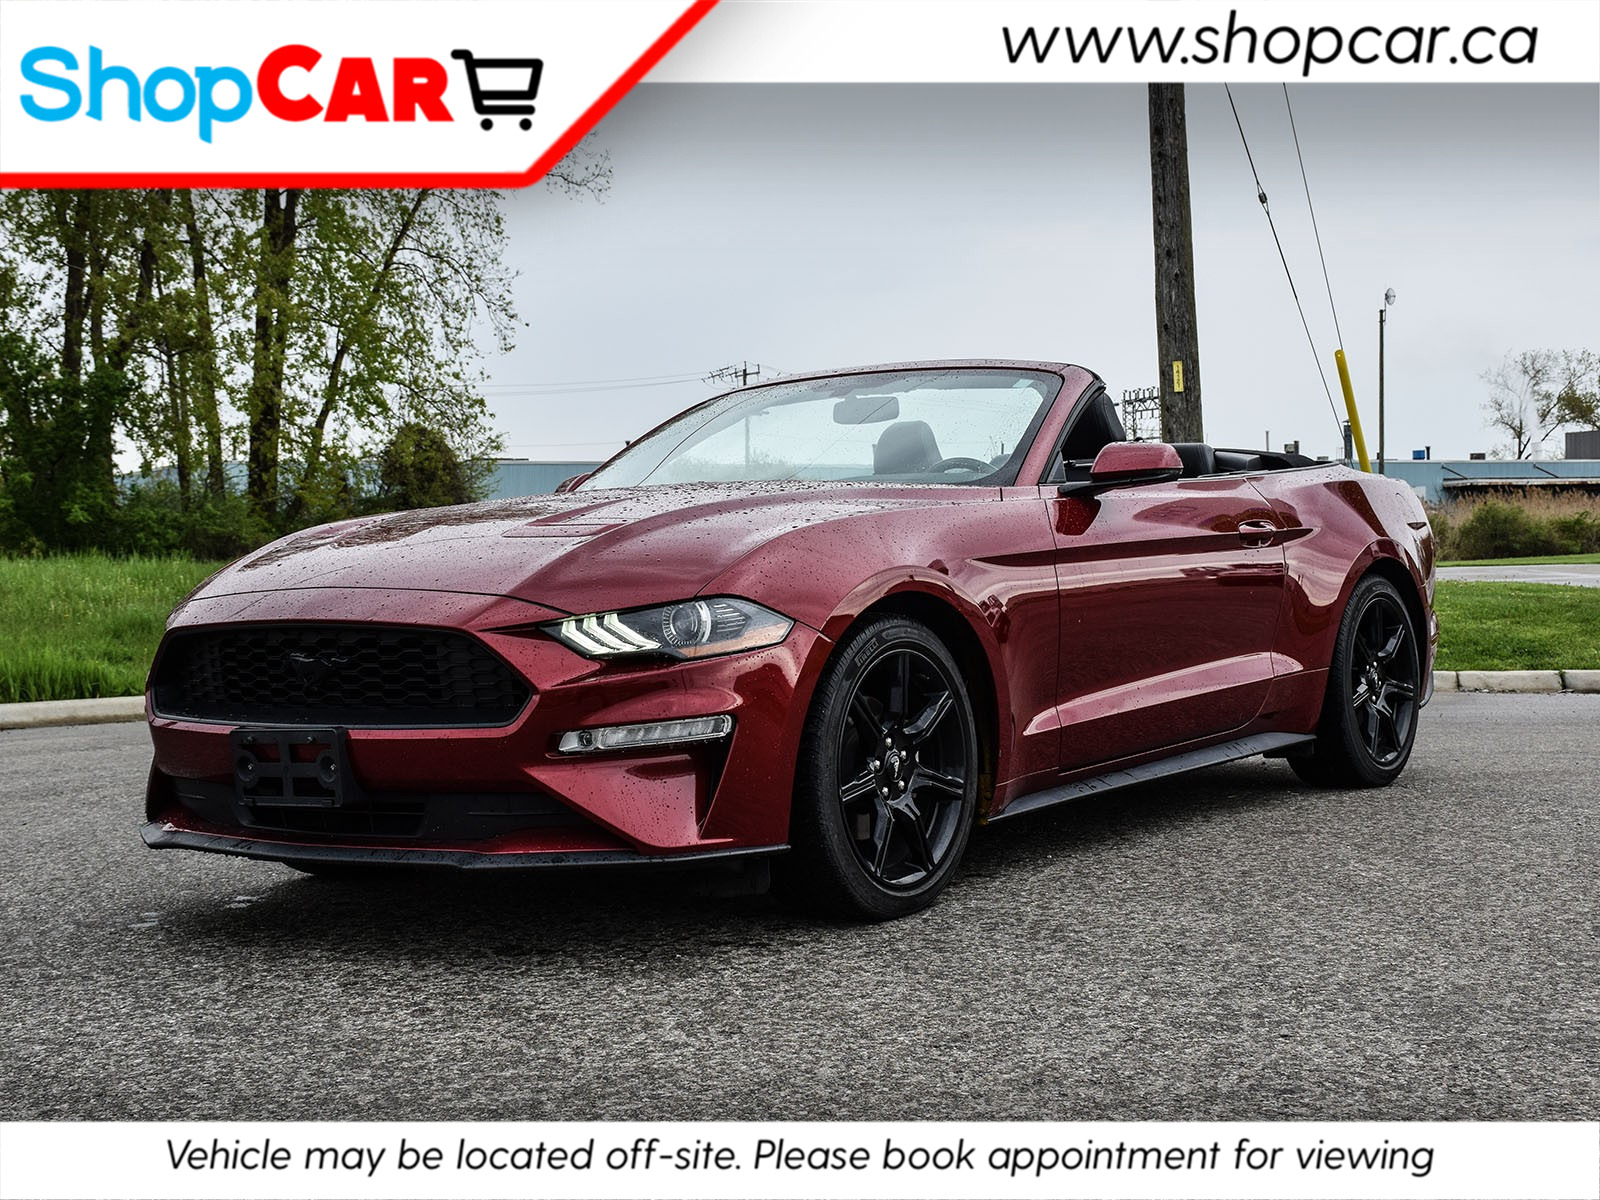 2019 Ford Mustang New Arrival | Just in time for Spring!!